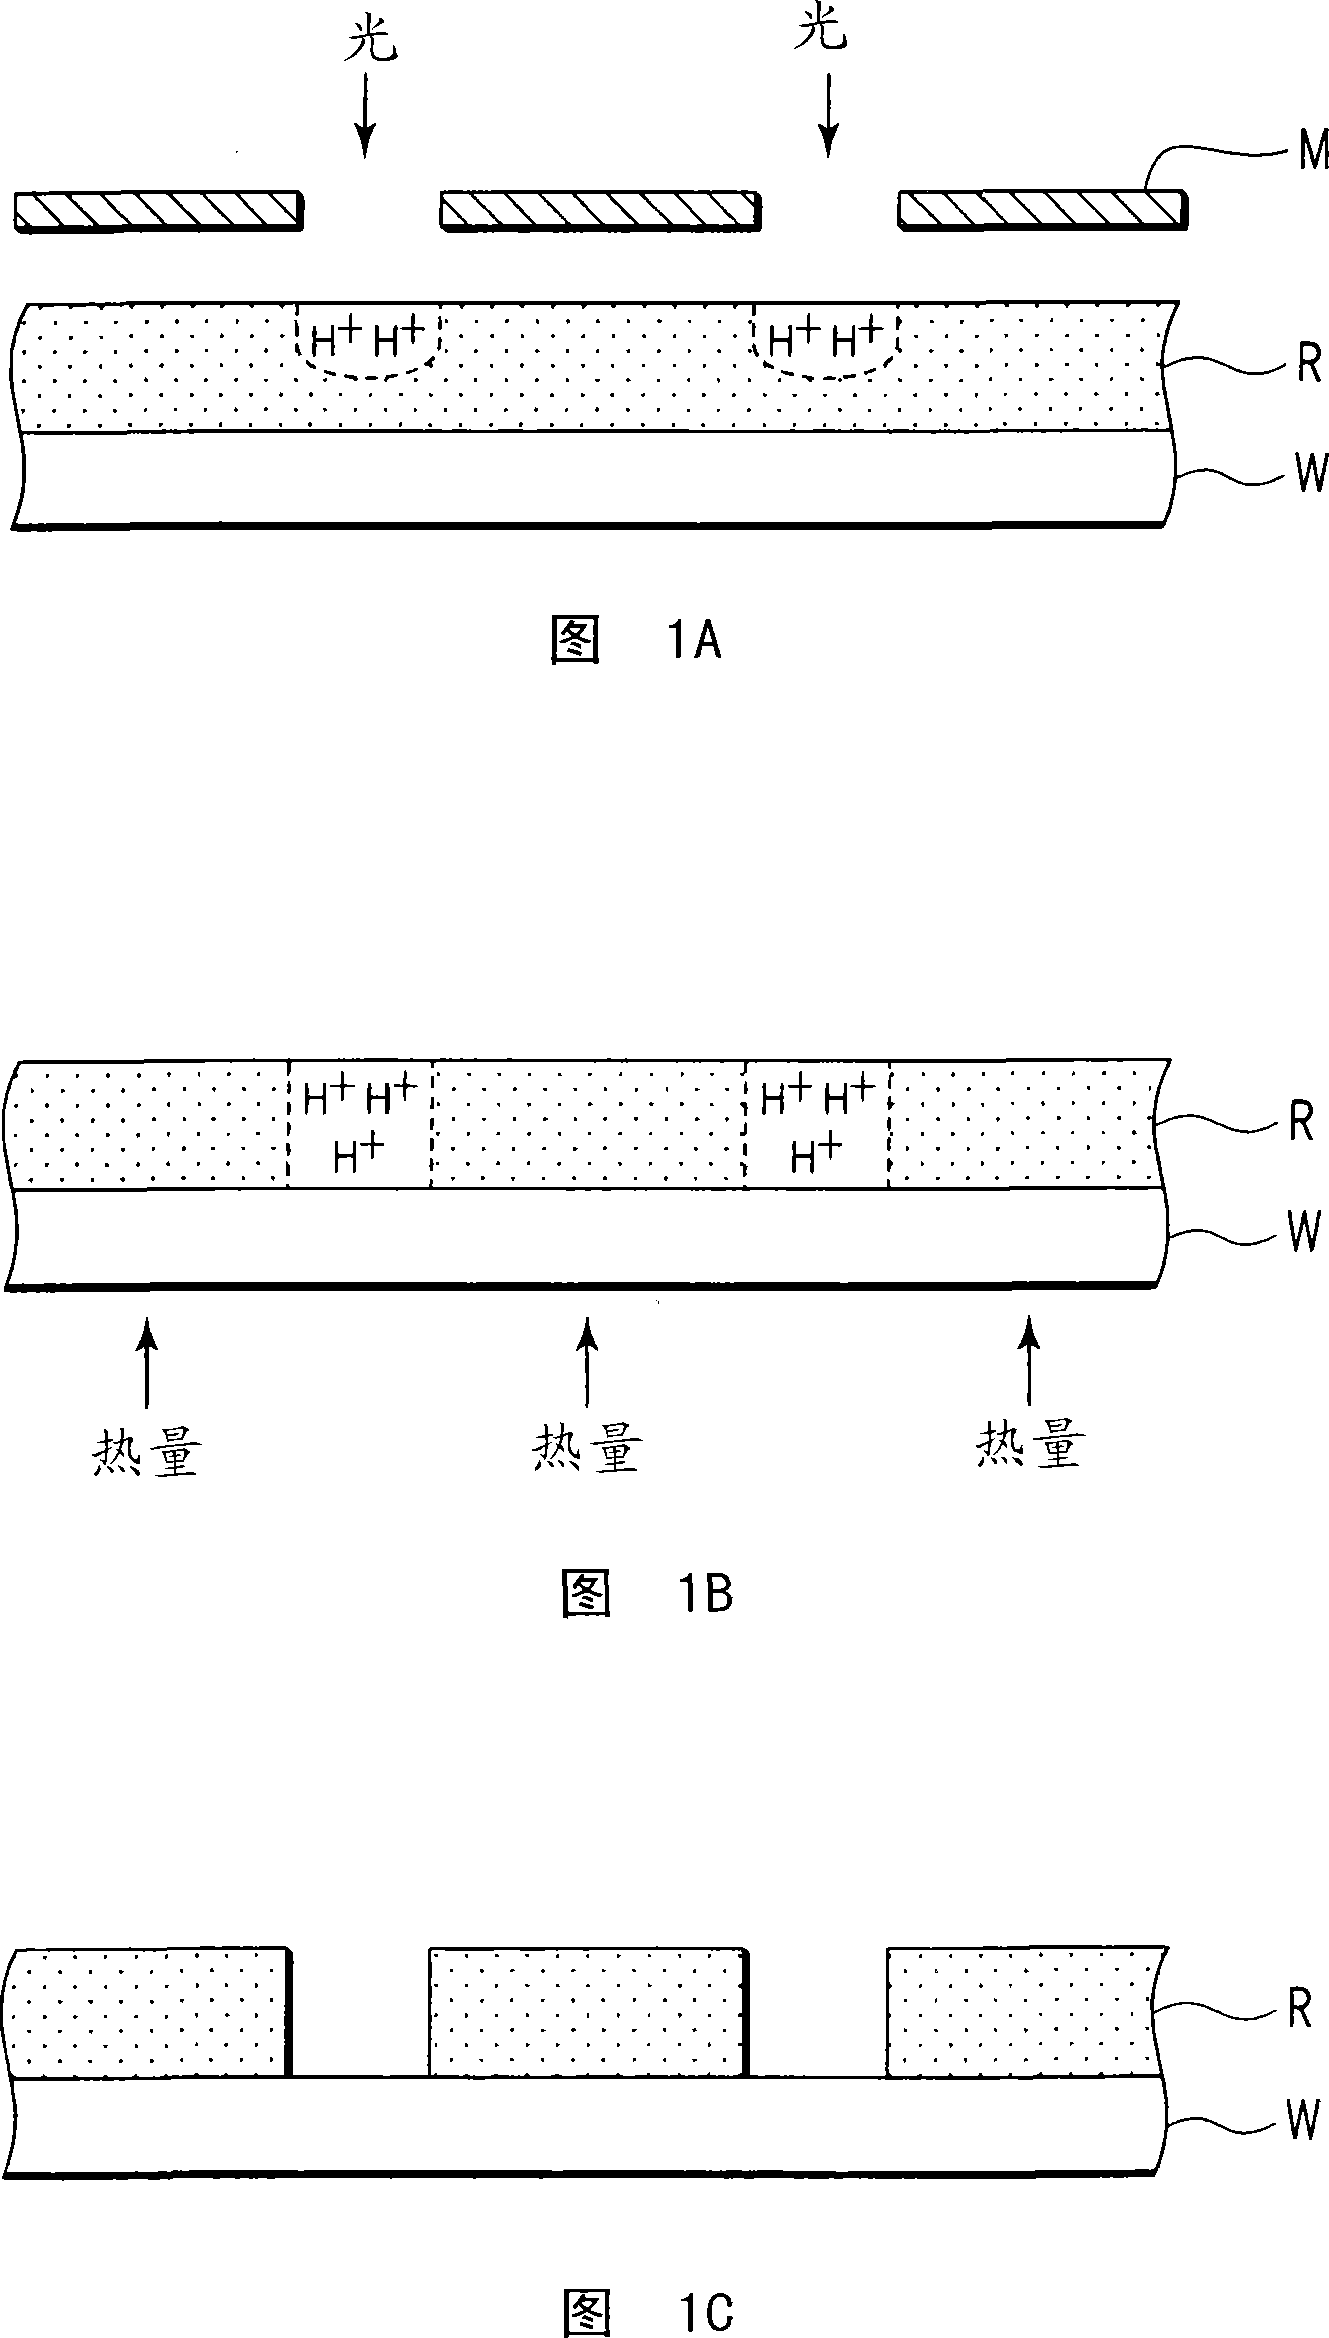 Substrate heating equipment and substrate heating method